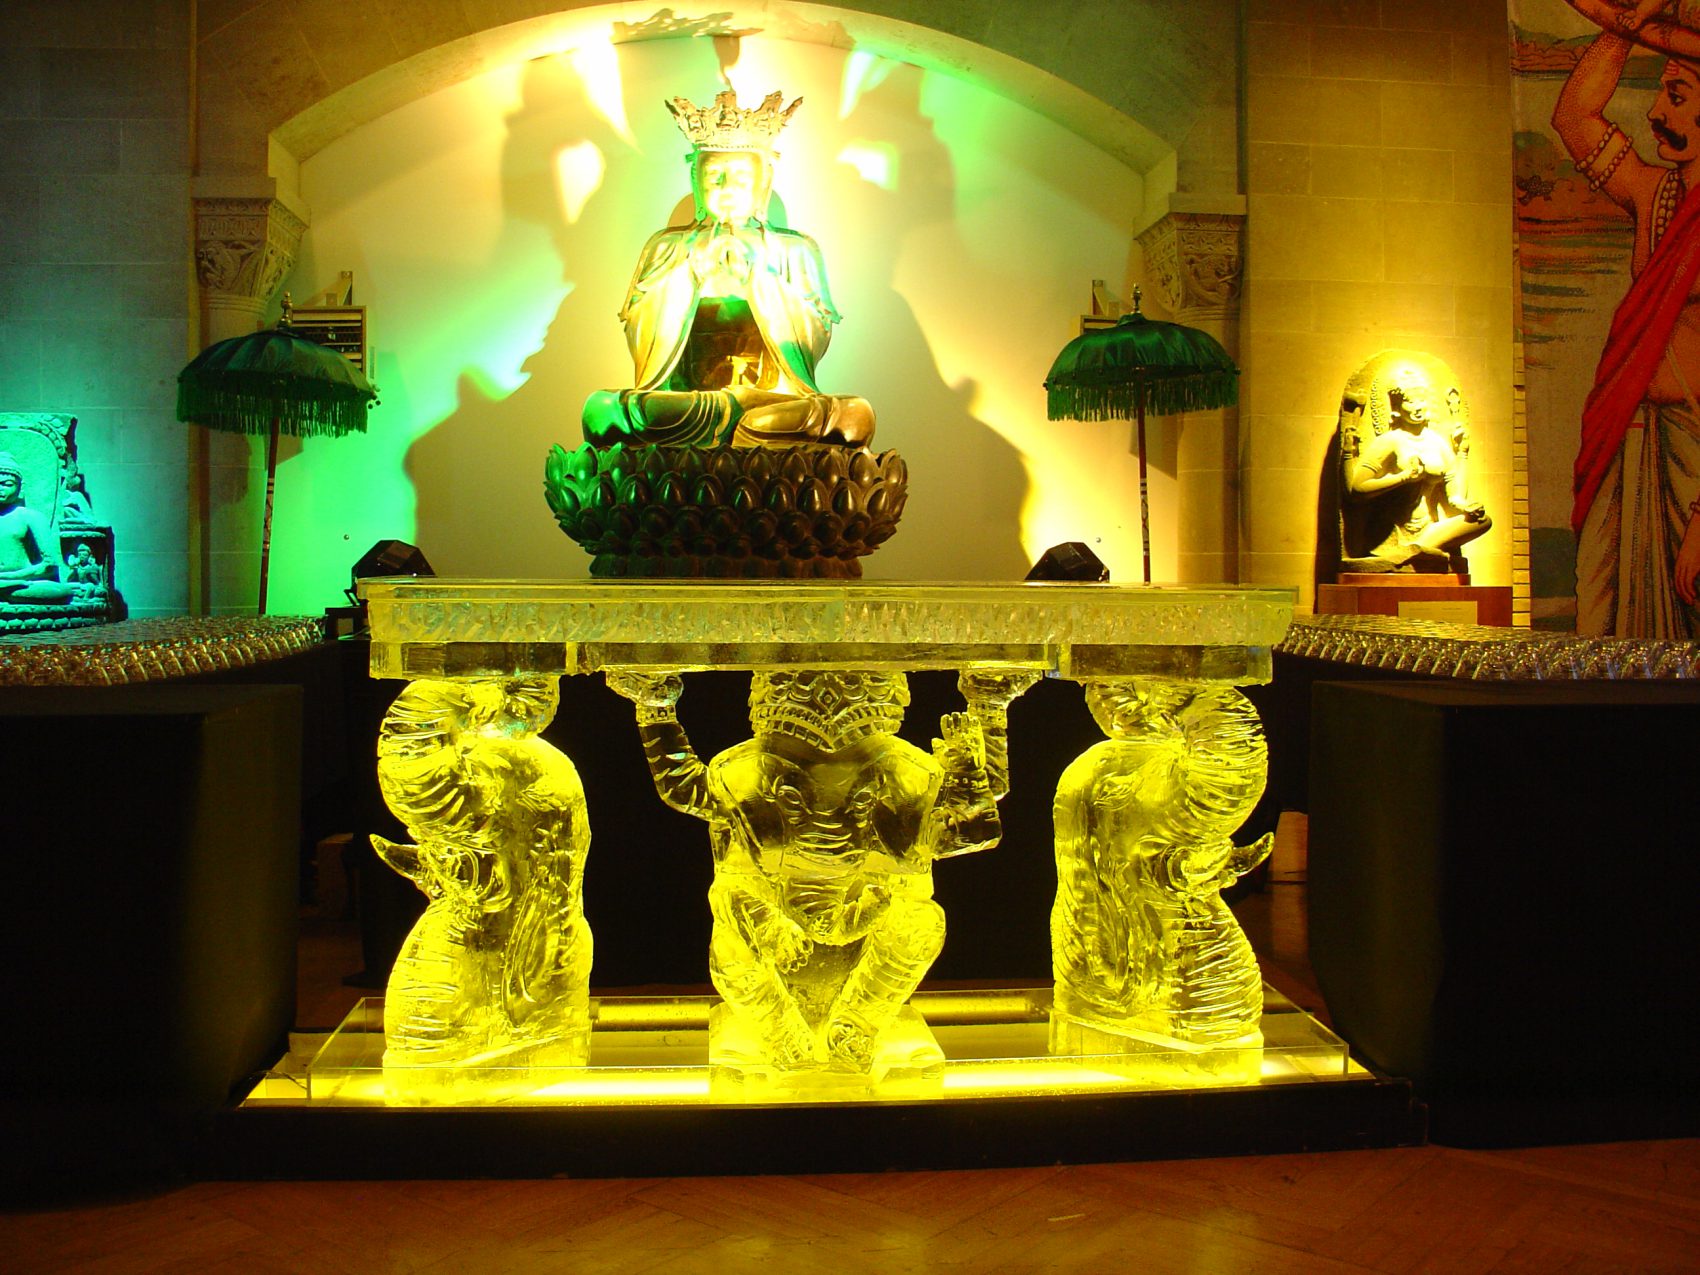 Ice bar with elephant carved side